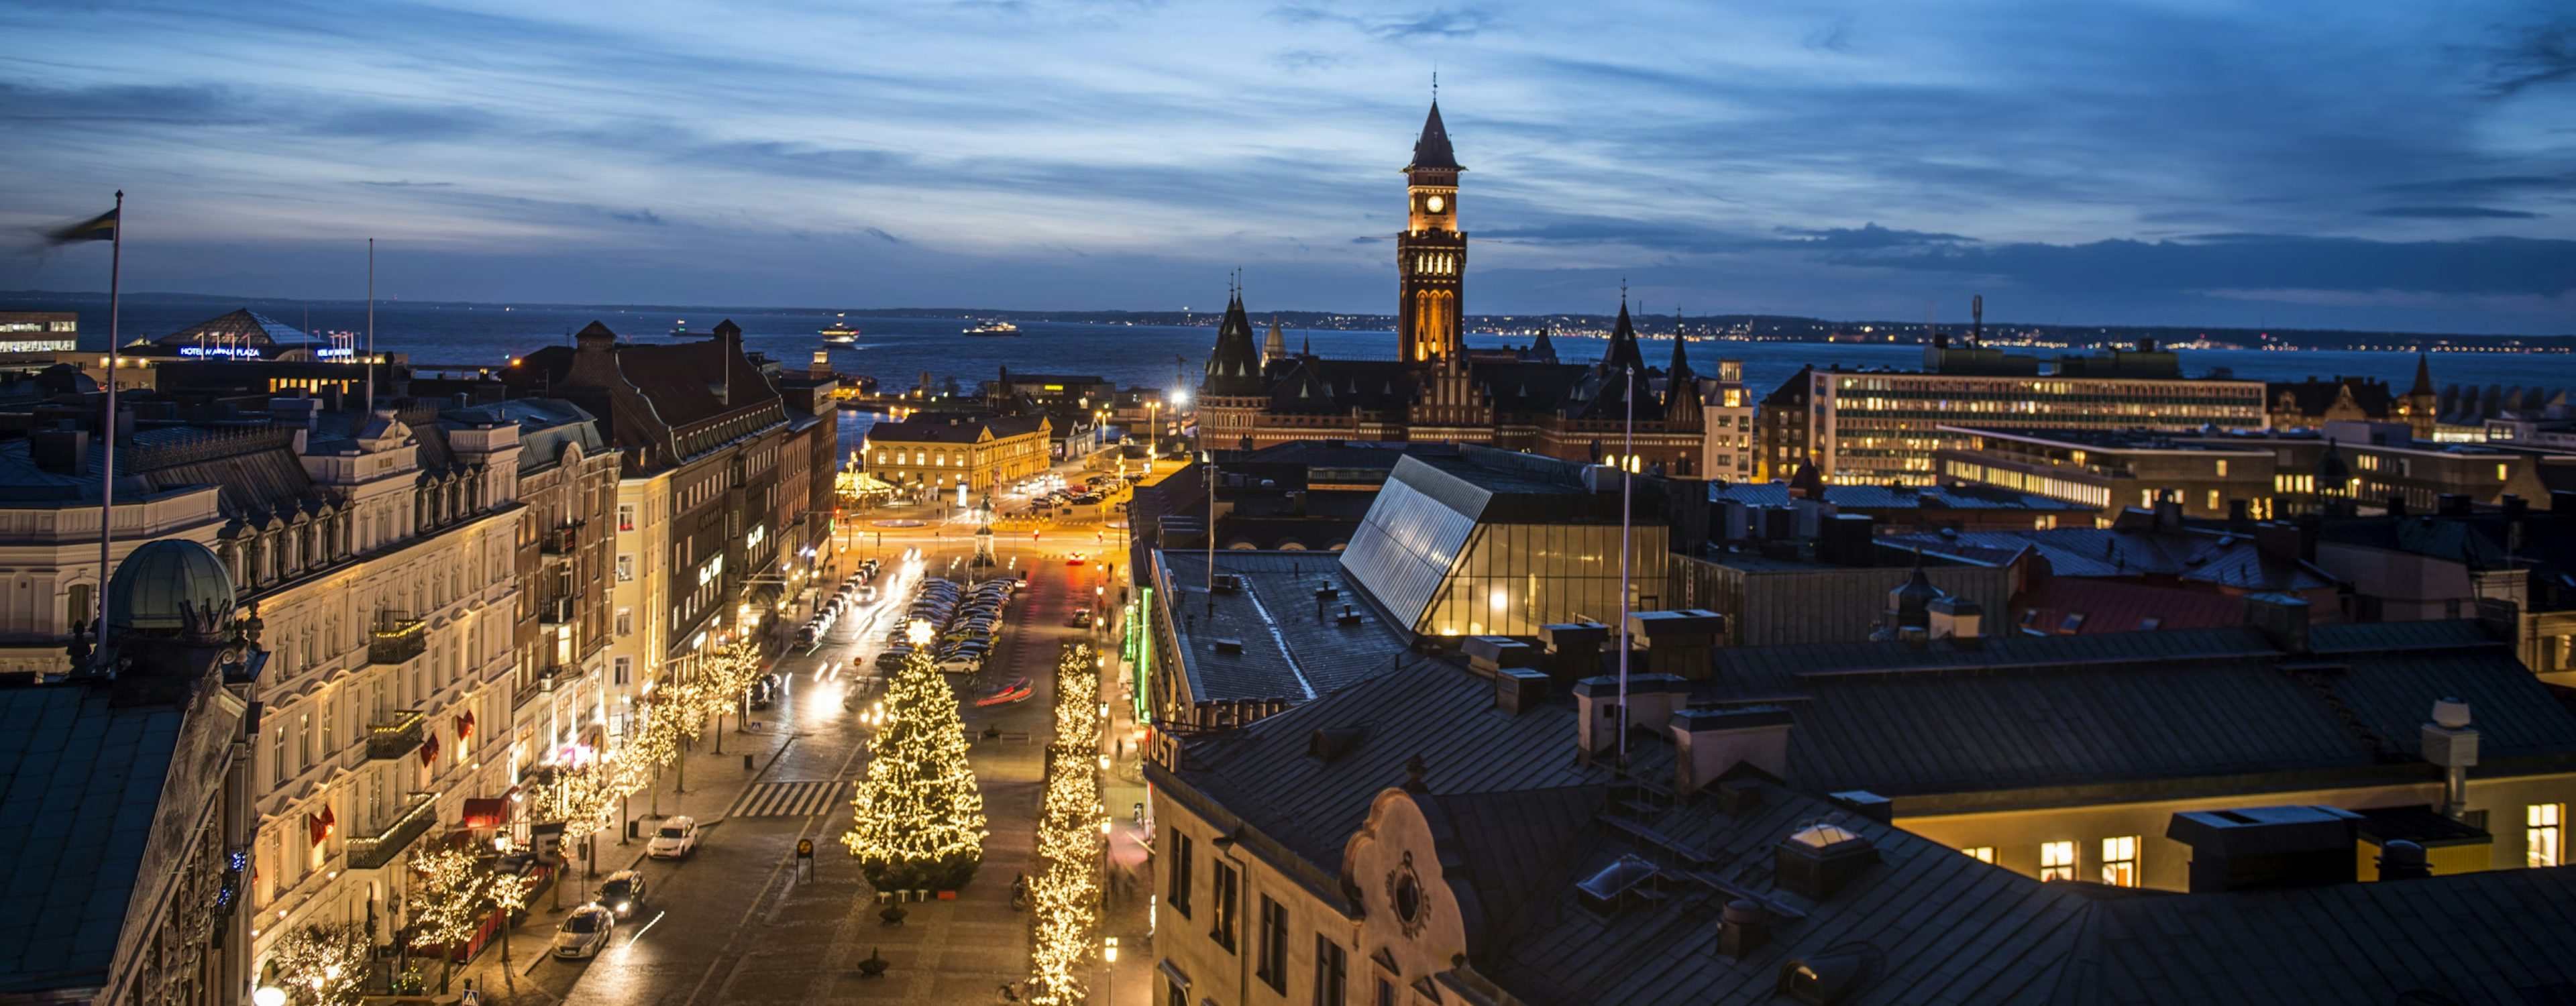 Evening view of Helsingborg's city center adorned with Christmas lights on the streets and a view over the Öresund strait